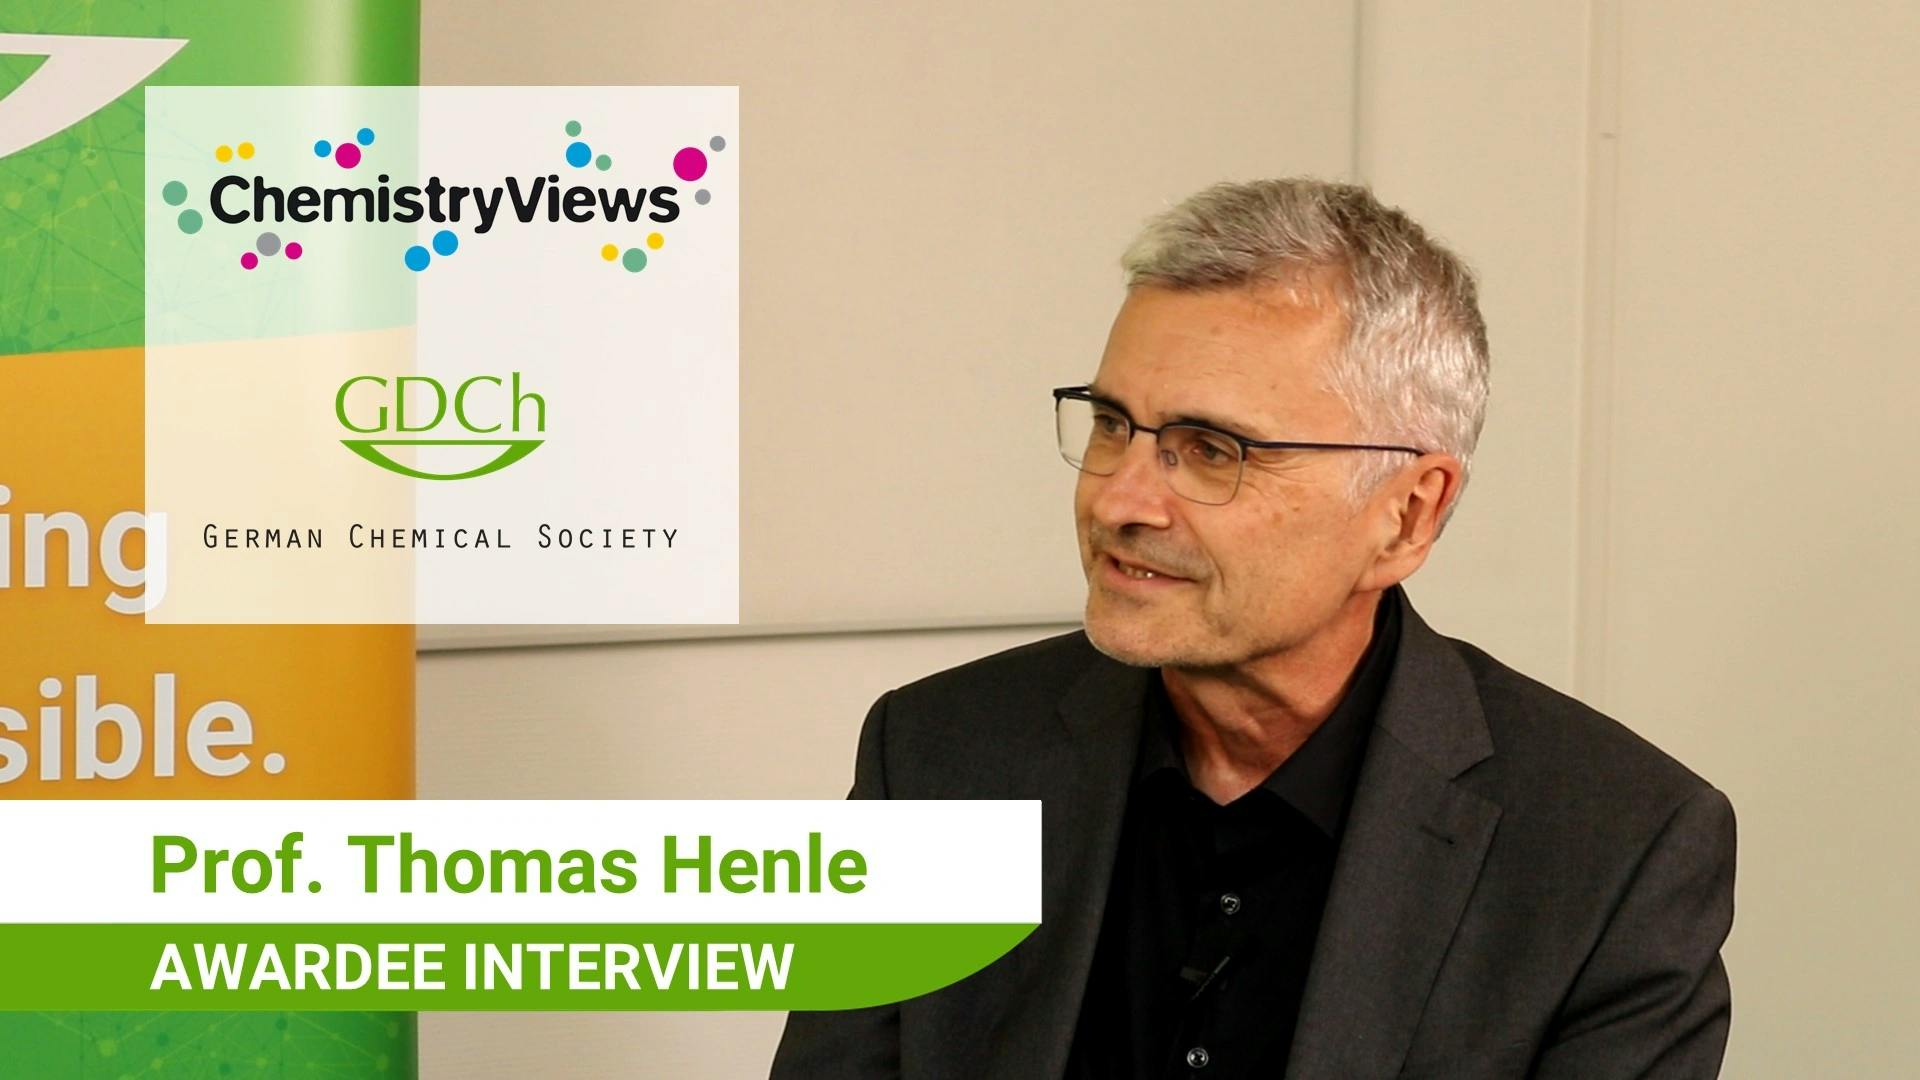 "The aim should not only be to increase the numbers." - Awardee interview with Thomas Henle